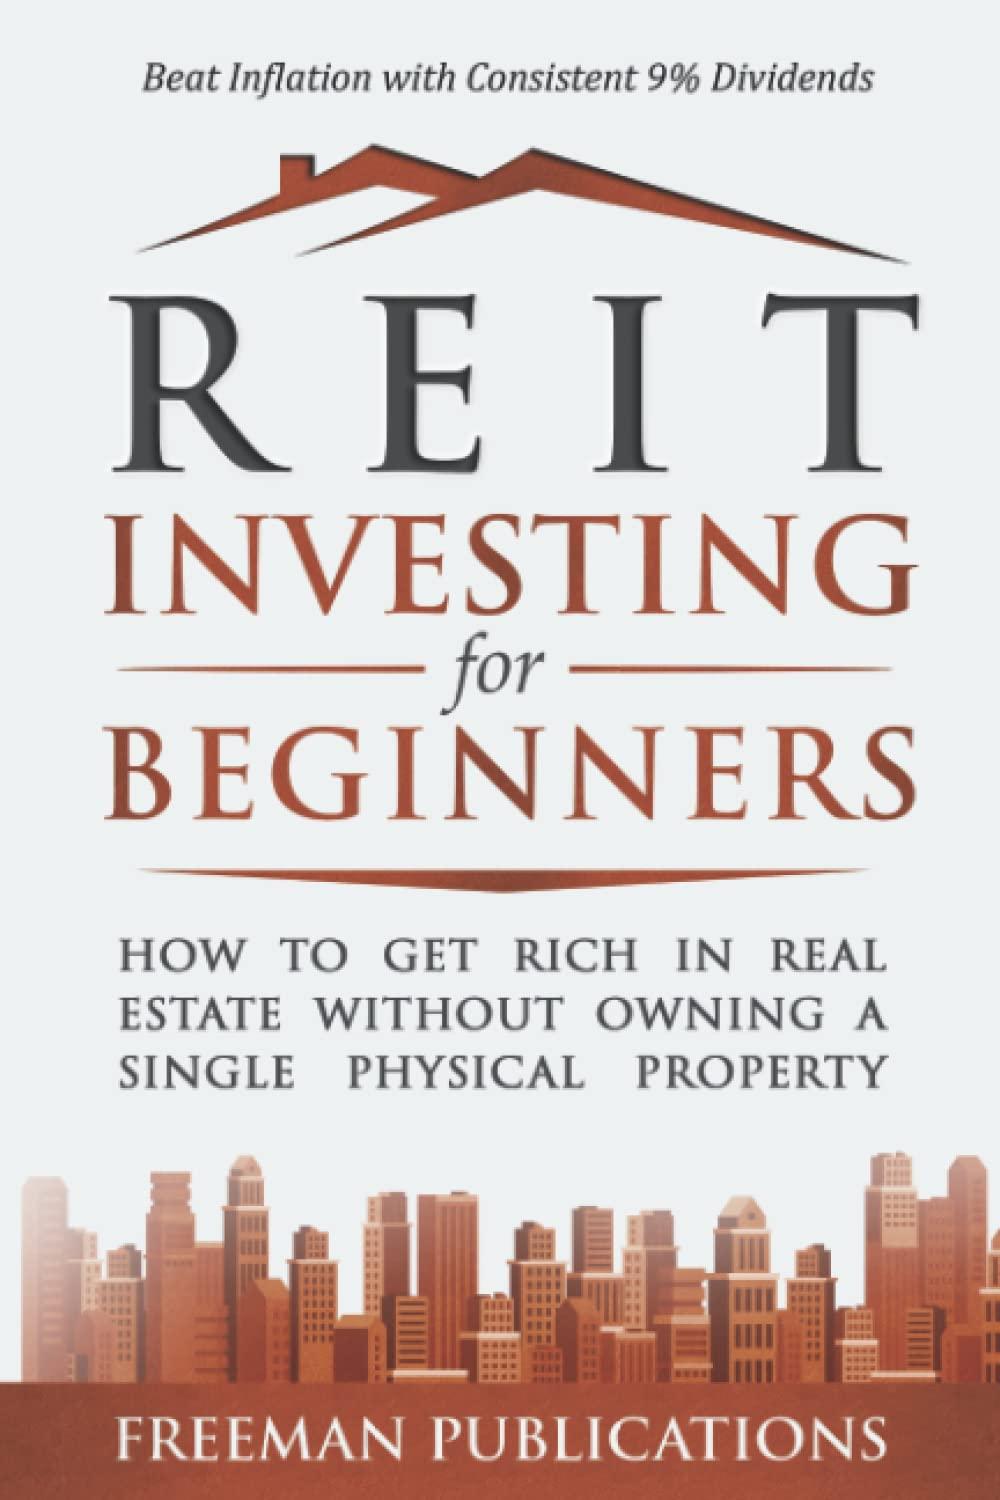 reit investing for beginners how to get rich in real estate without owning a single physical property beat